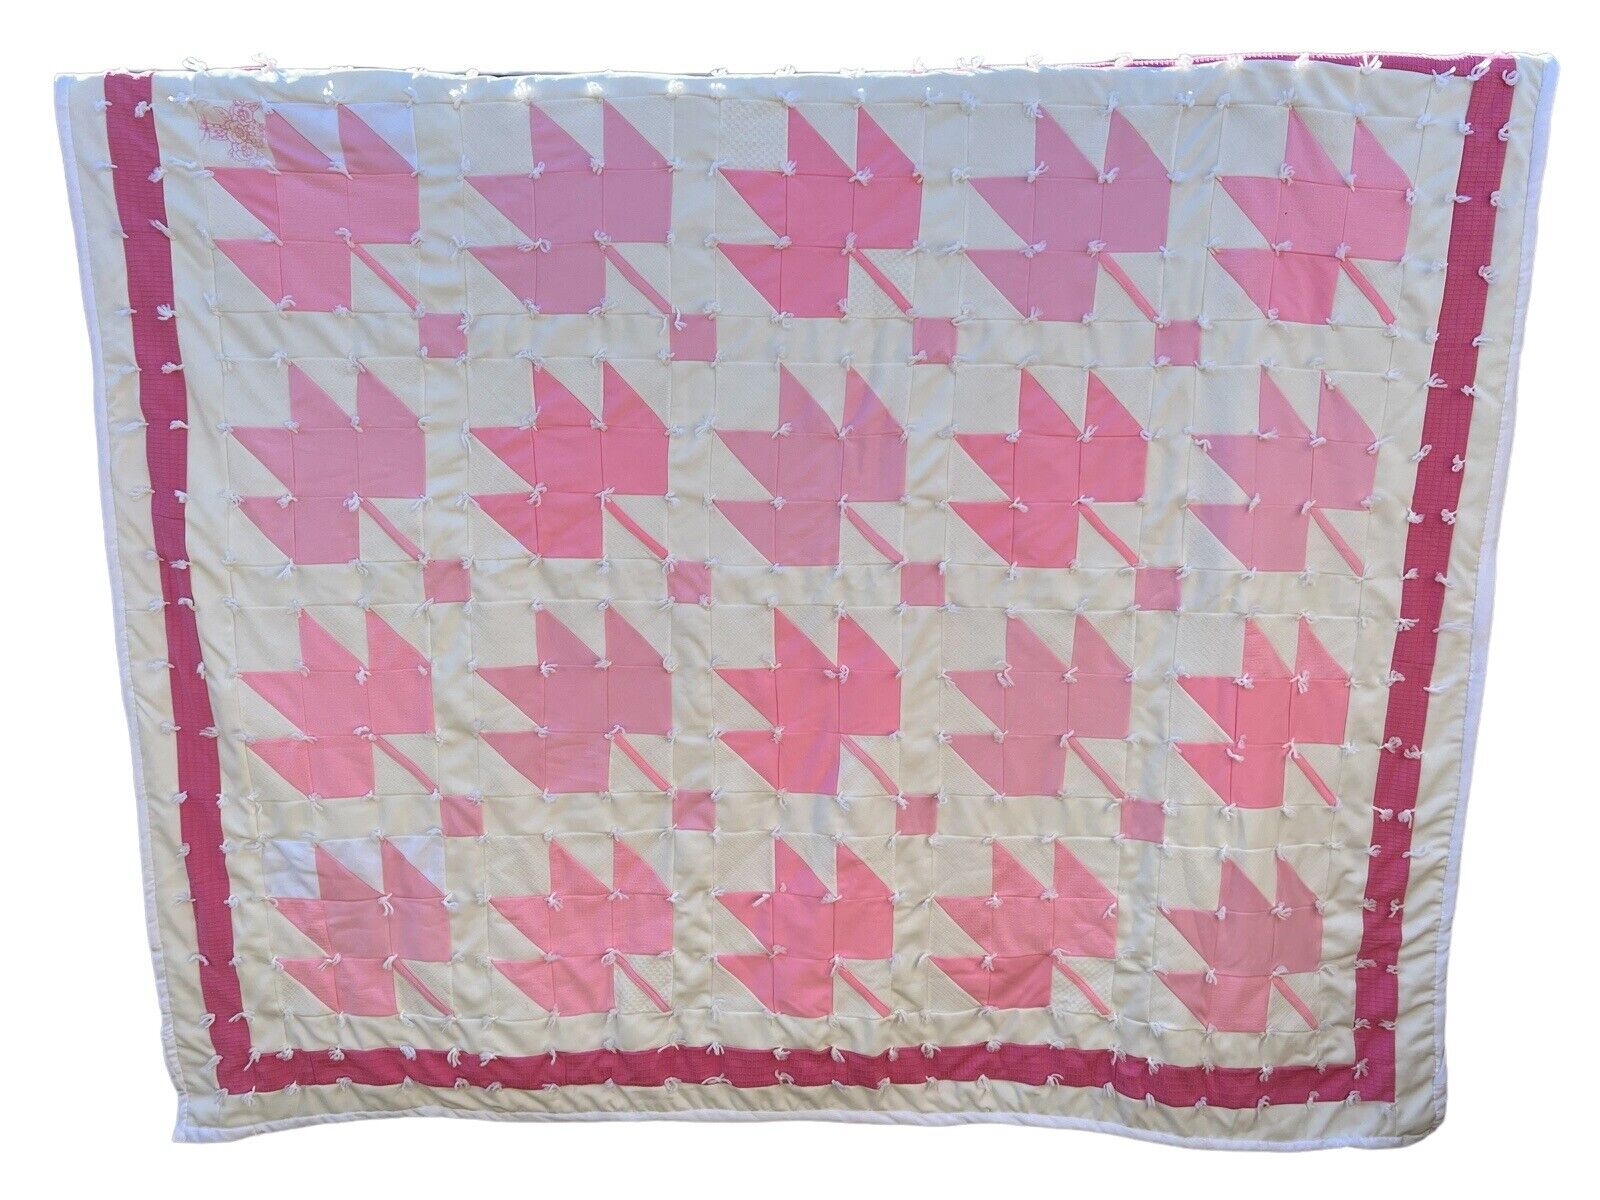 Handmade Quilt Patchwork Bed Spread 81 X 70 Pink And White Girls Nursery